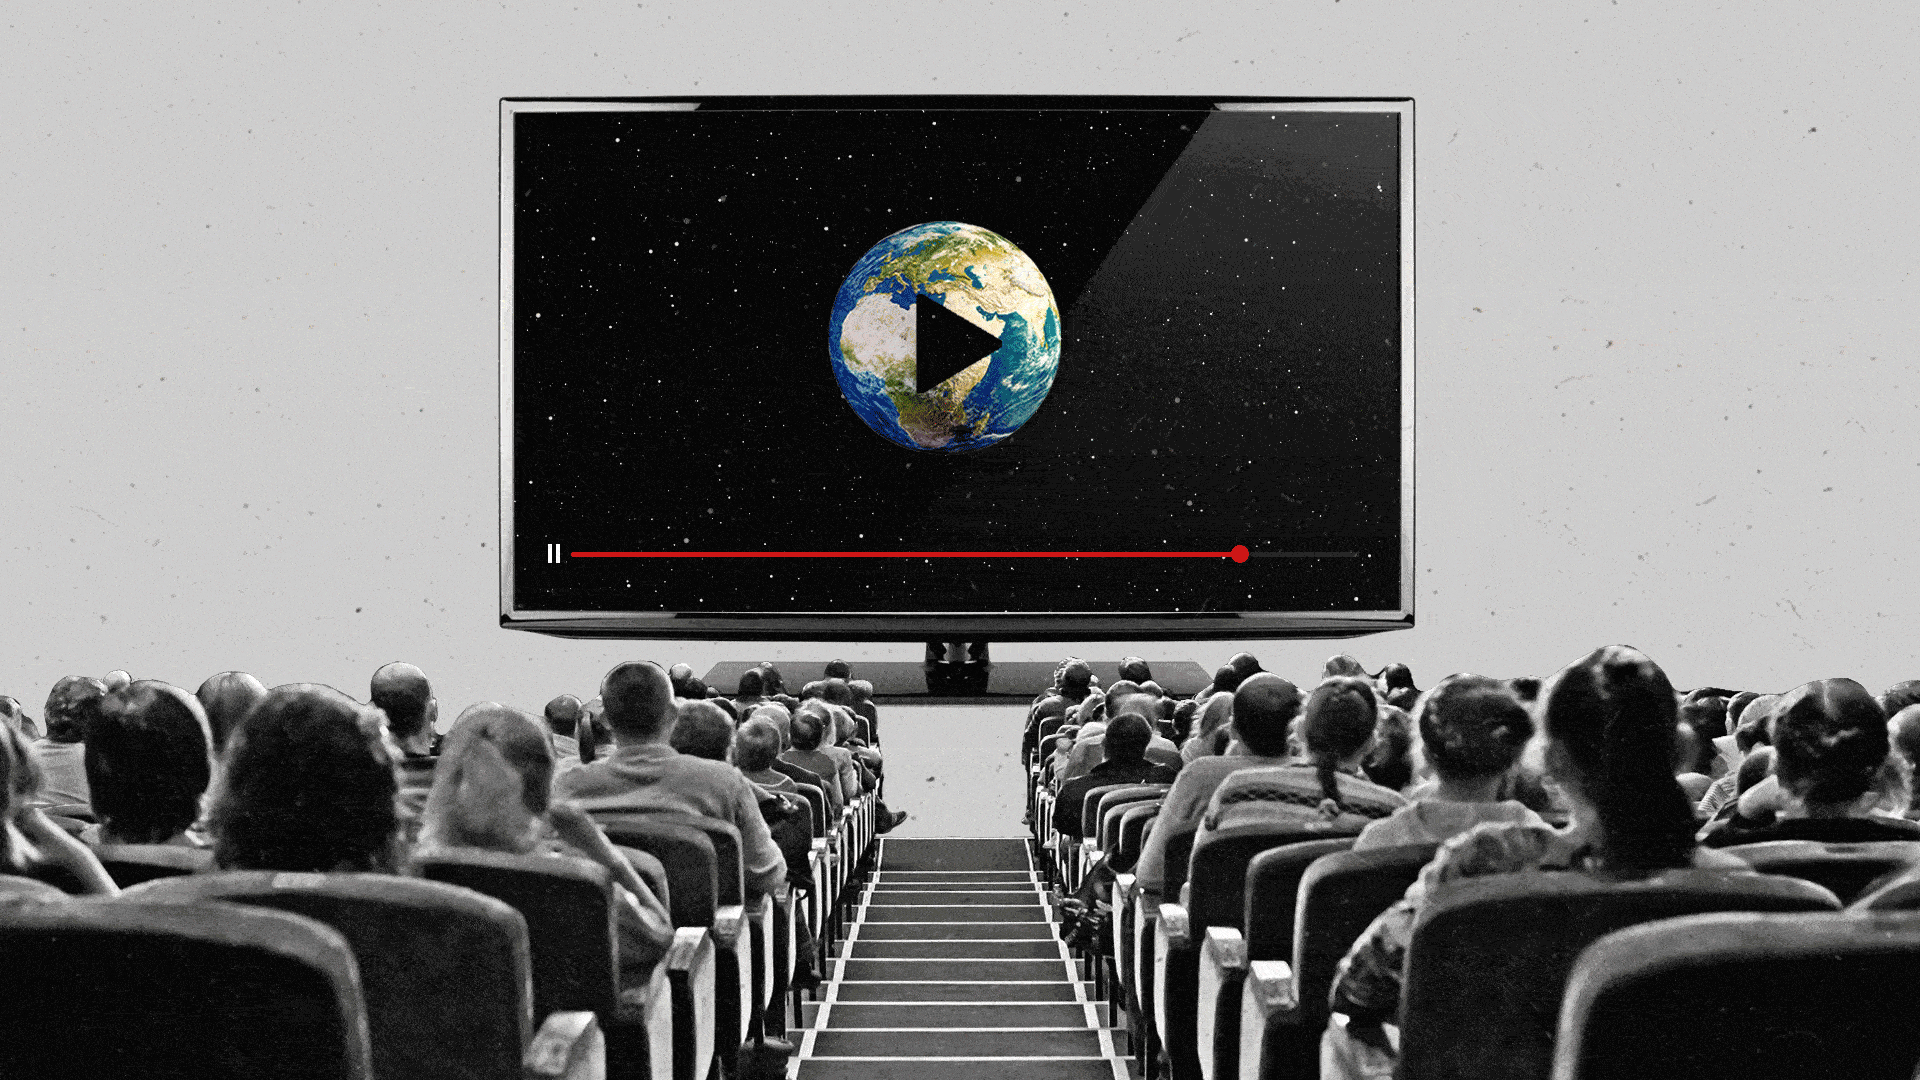 A seated audience watches a connected TV showing stars rushing towards the viewer. The play-button in the center shows a globe background.